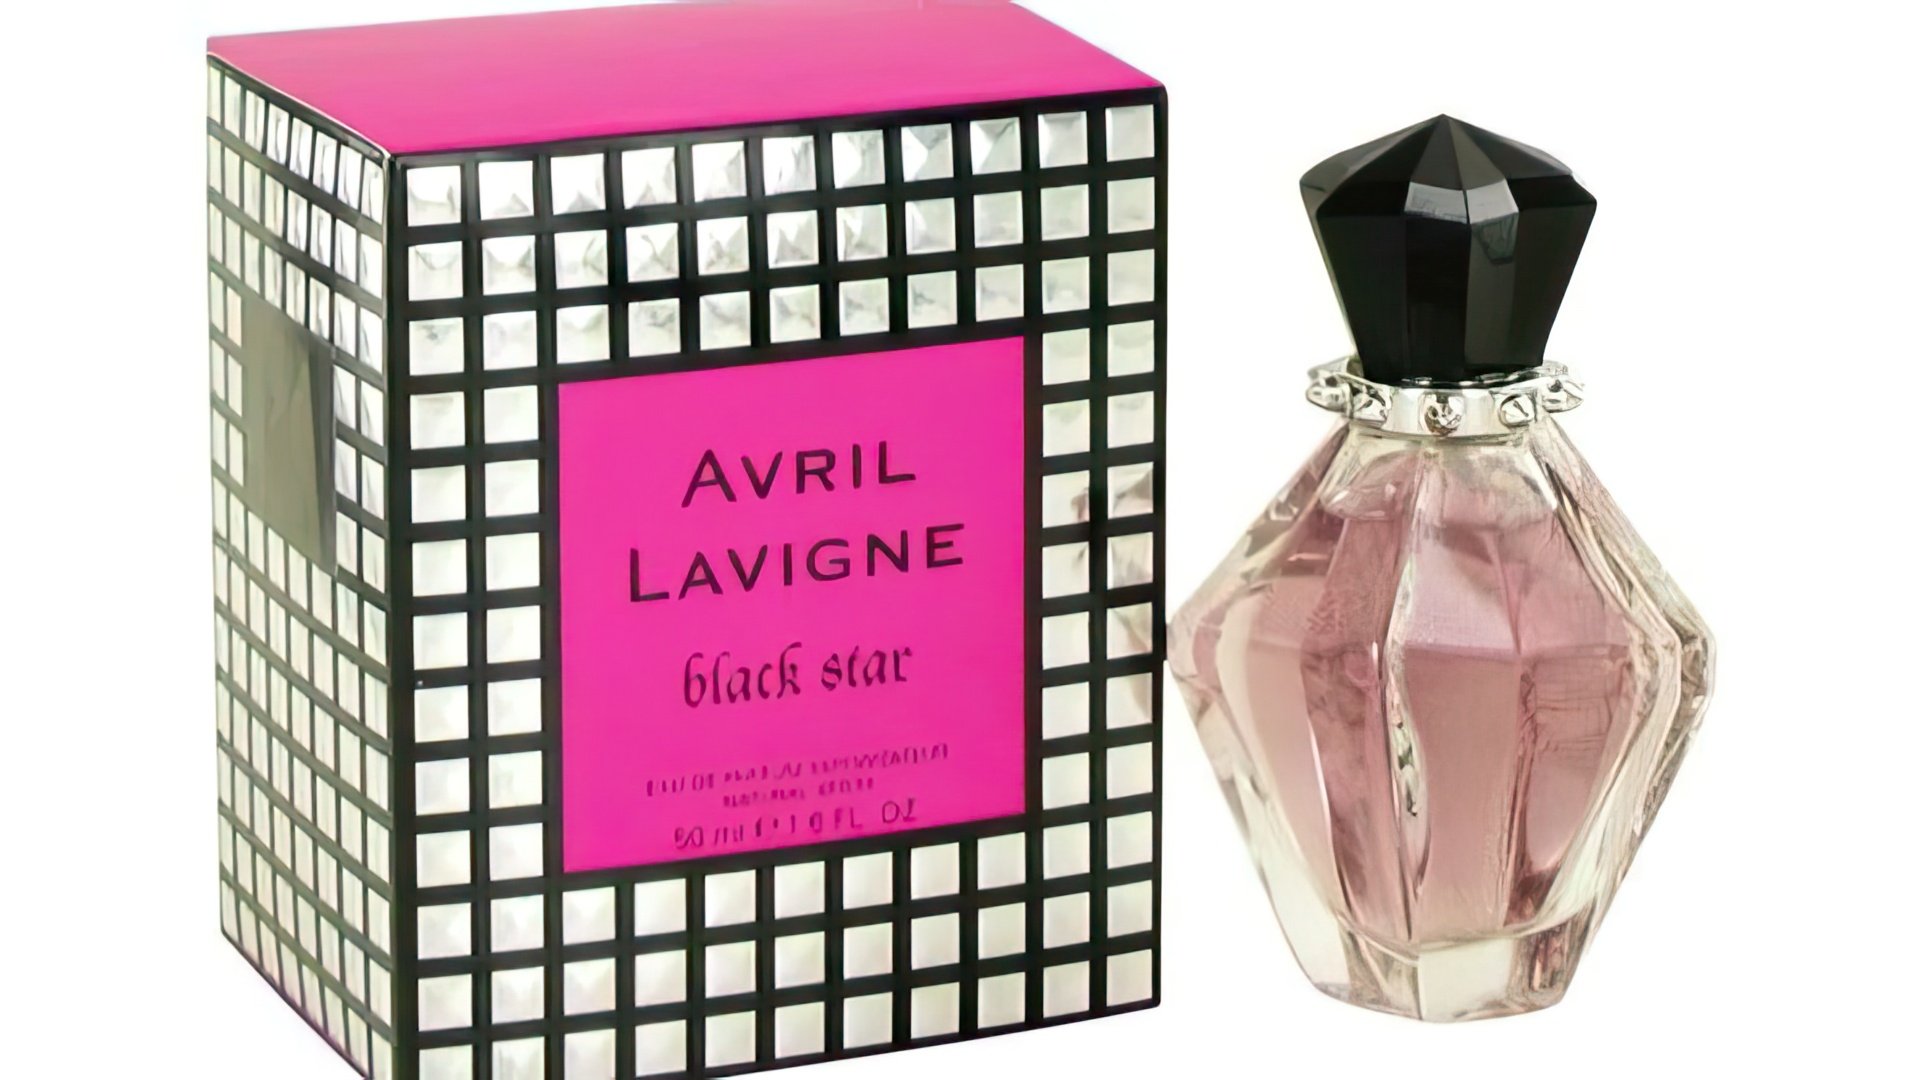 Perfume by Avril Lavigne